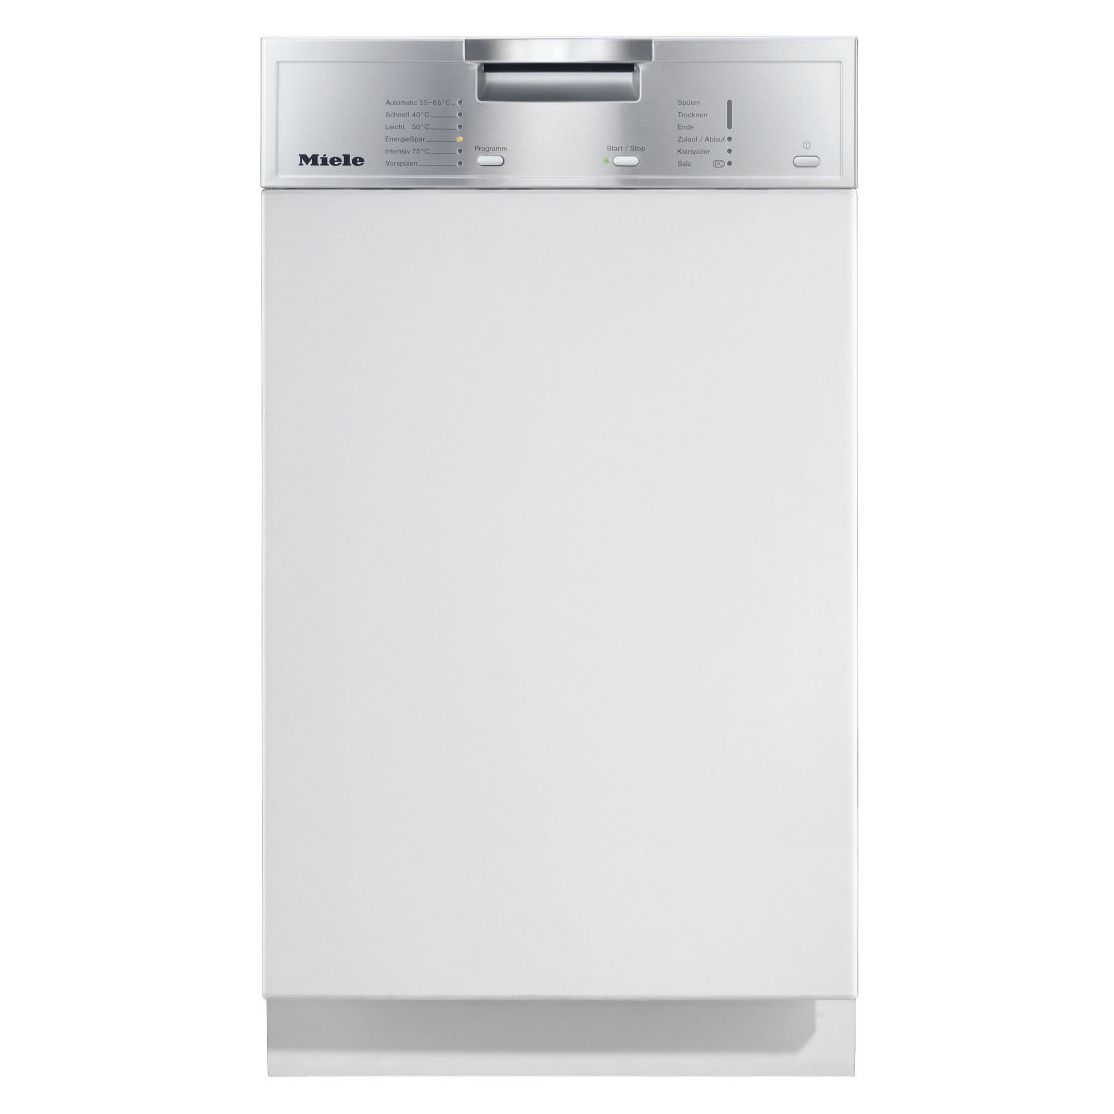 Miele G1102SCi Semi-Integrated Slimline Dishwasher, Stainless Steel at John Lewis